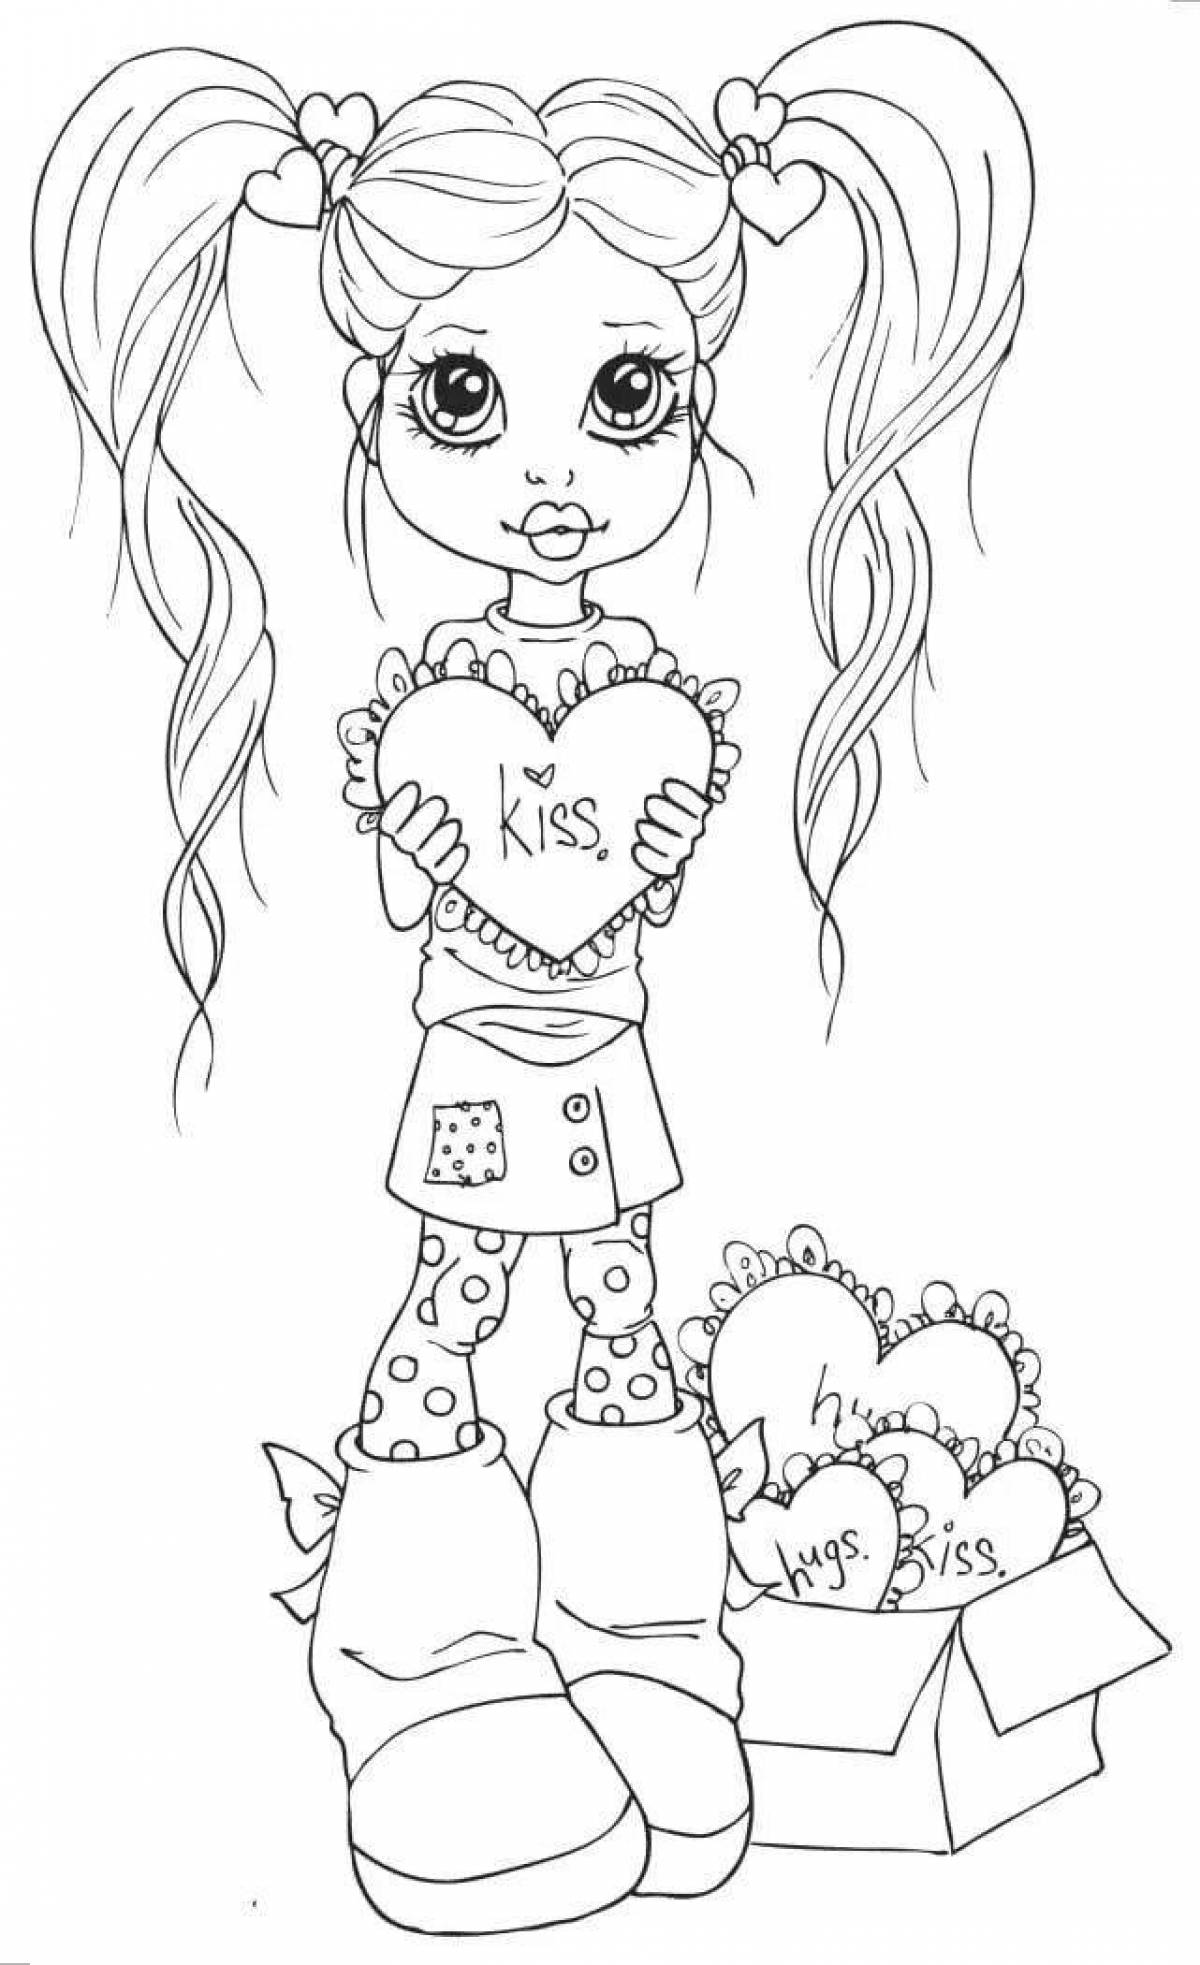 Fun coloring book for girls 9-10 years old